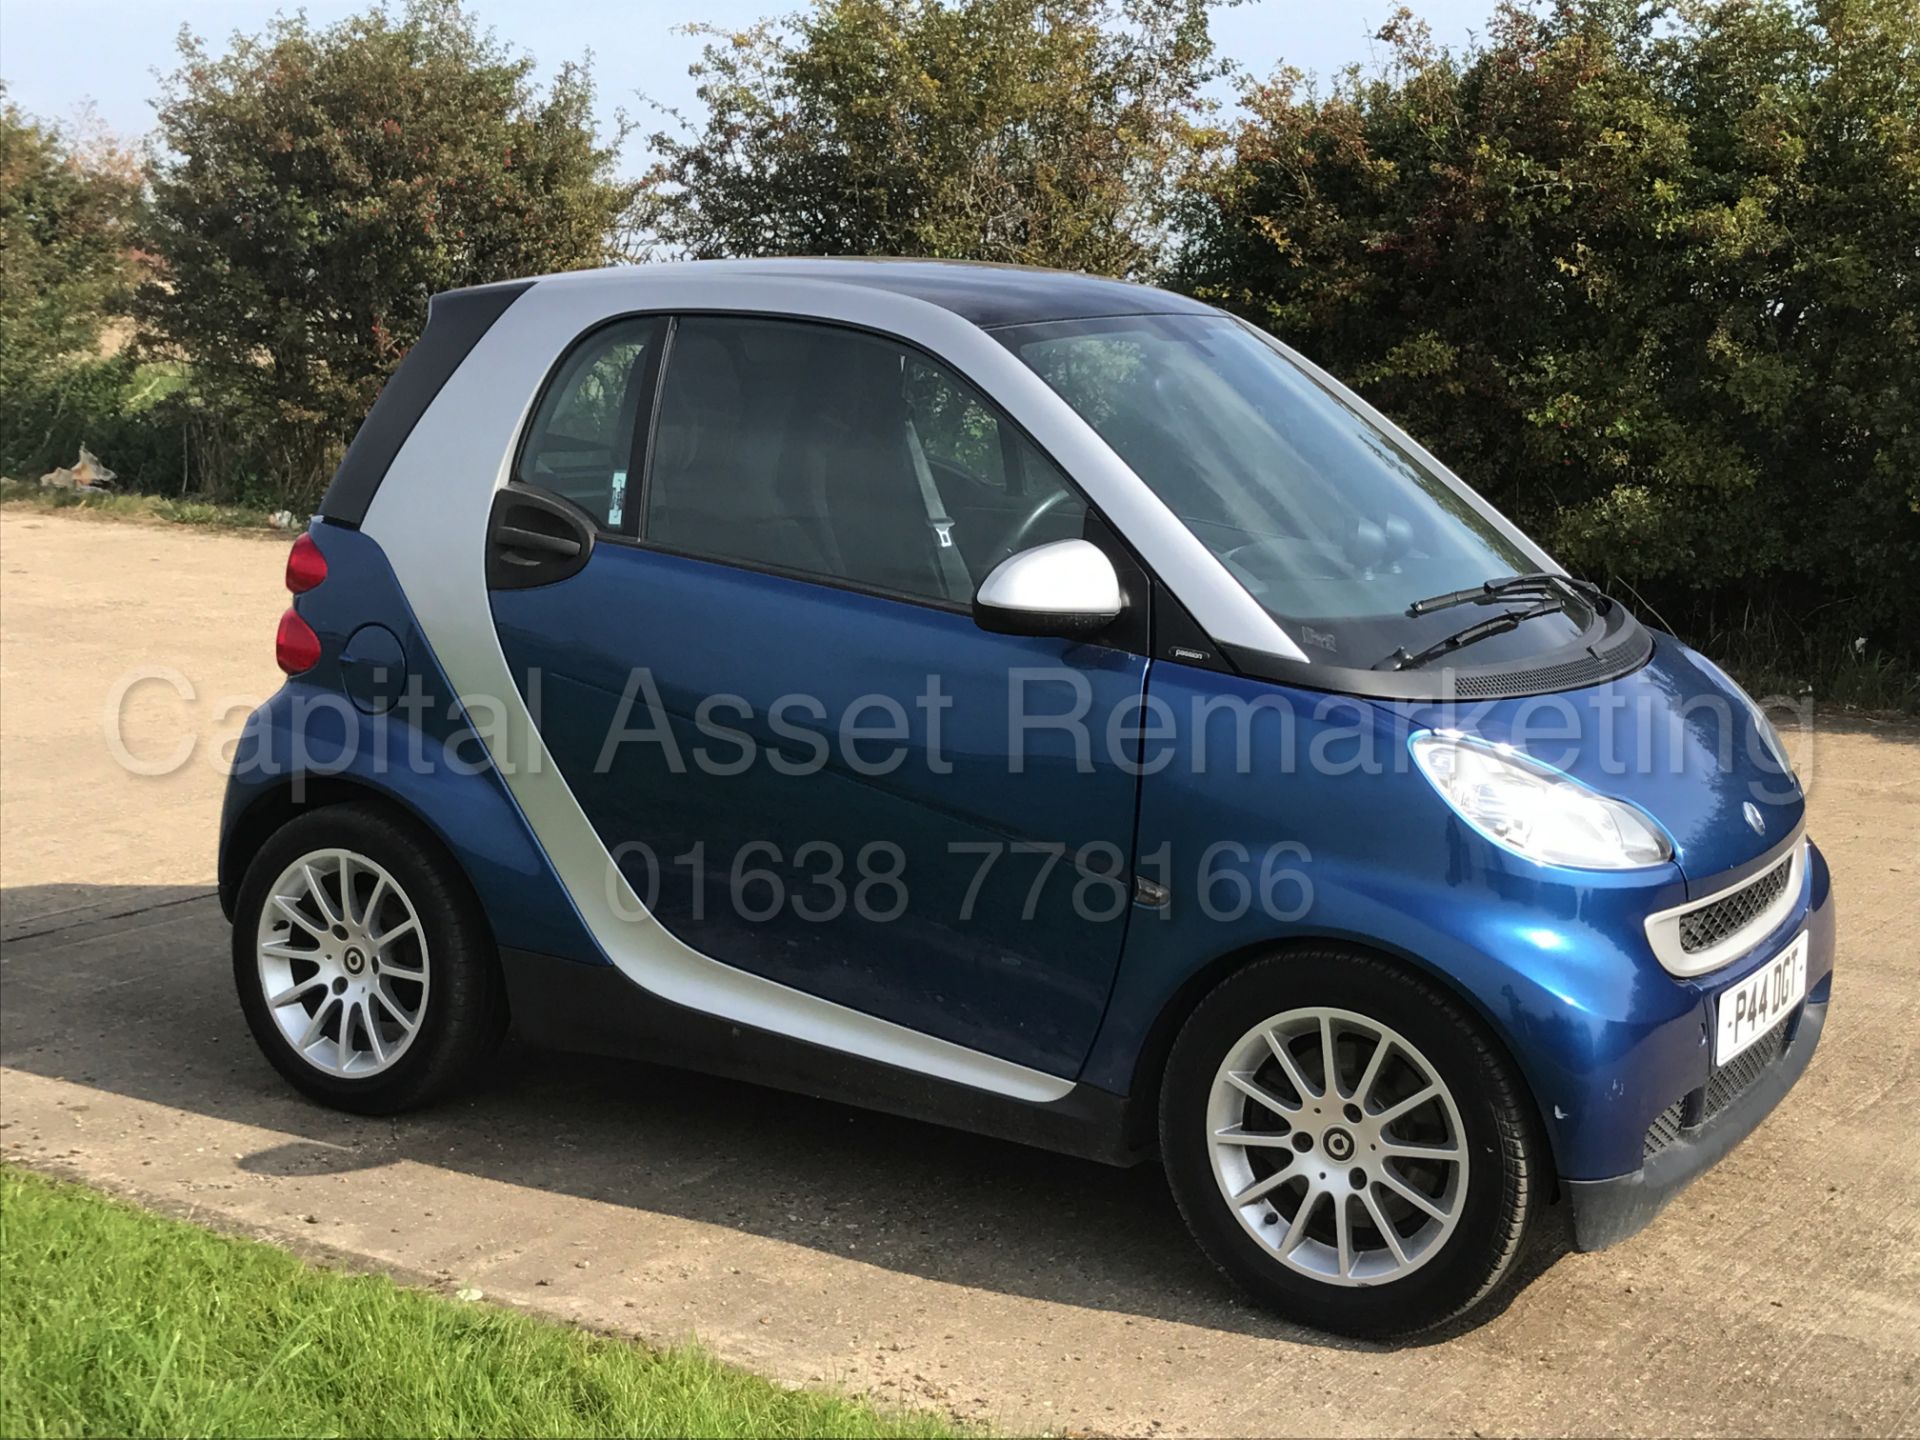 (On Sale) SMART FORTWO 'PASSION' (2011 - 11 REG) 'CDI - DIESEL - AUTO - AIR CON - PAN ROOF' (70 MPG) - Image 8 of 24